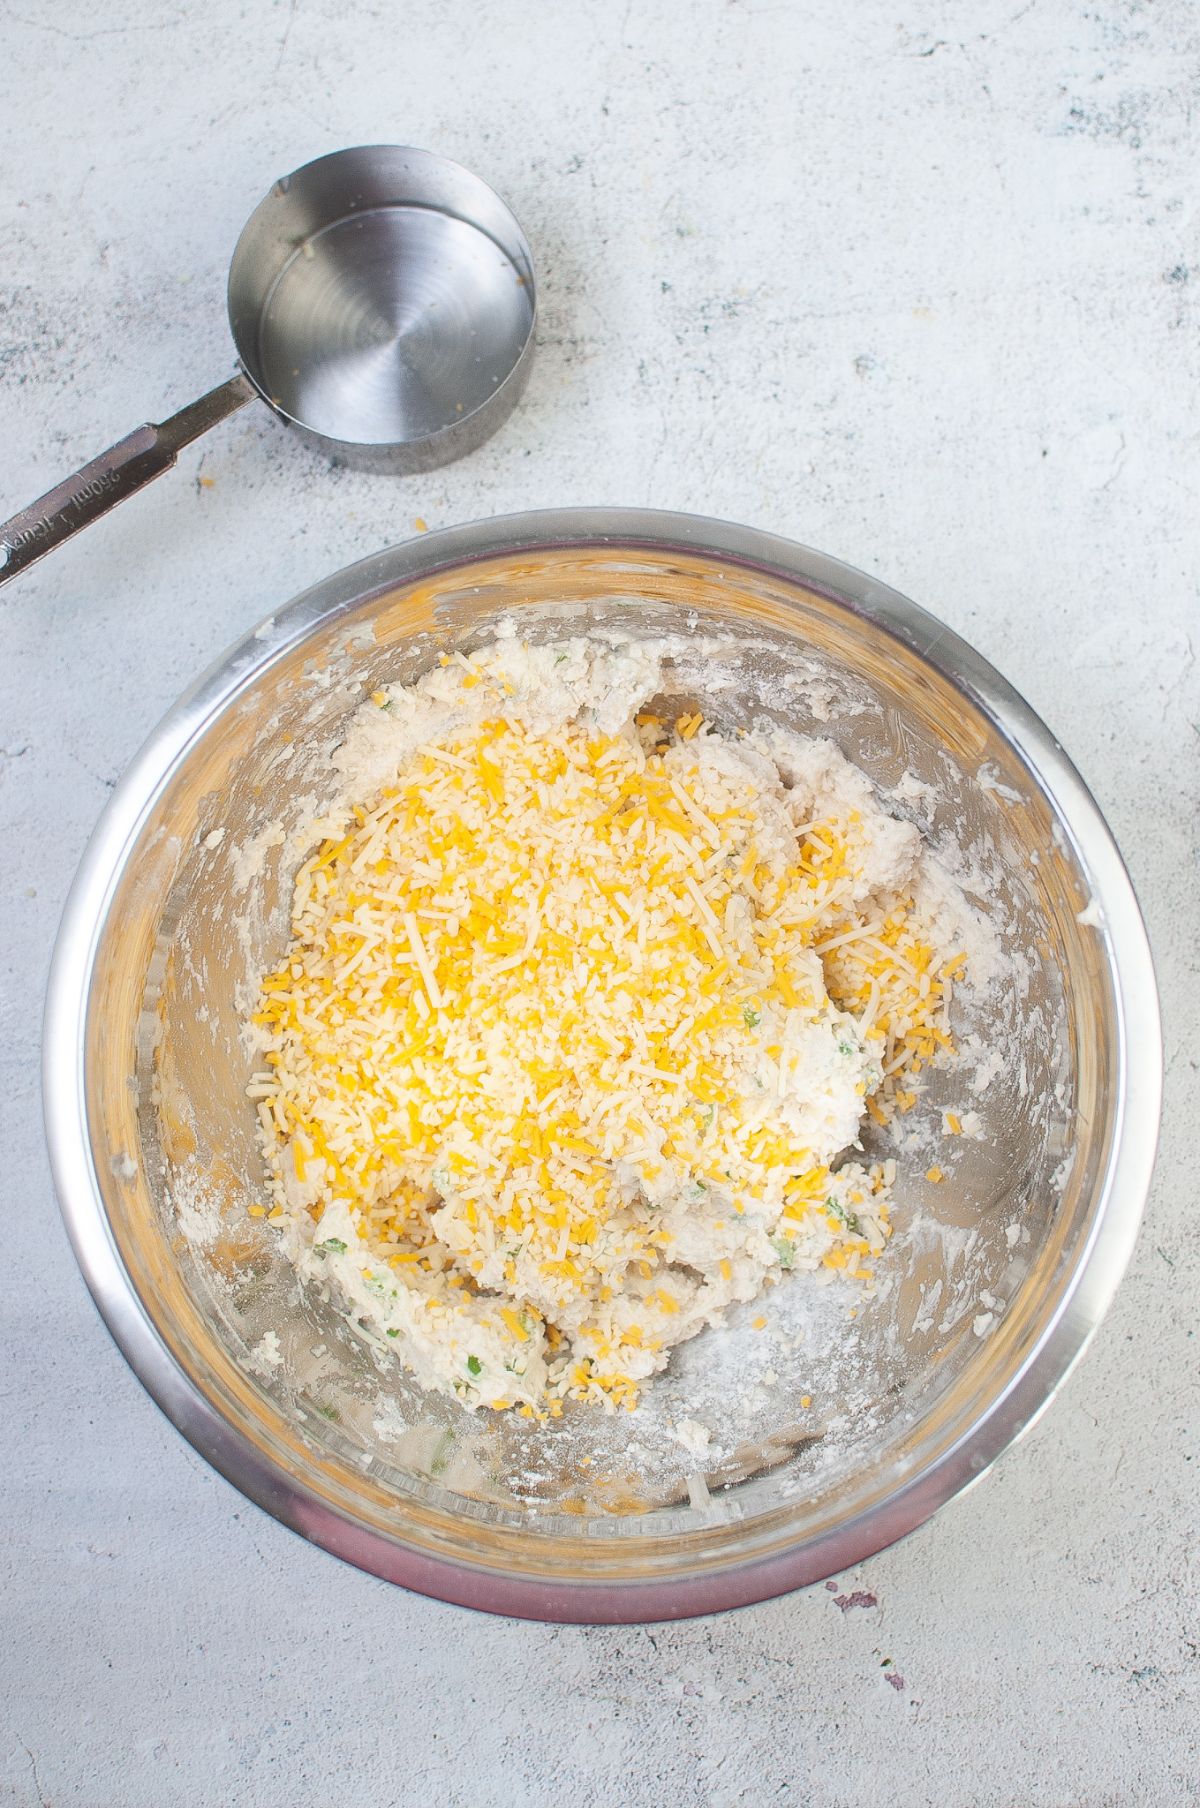 The shredded cheese is added to the mixture in a metal bowl.